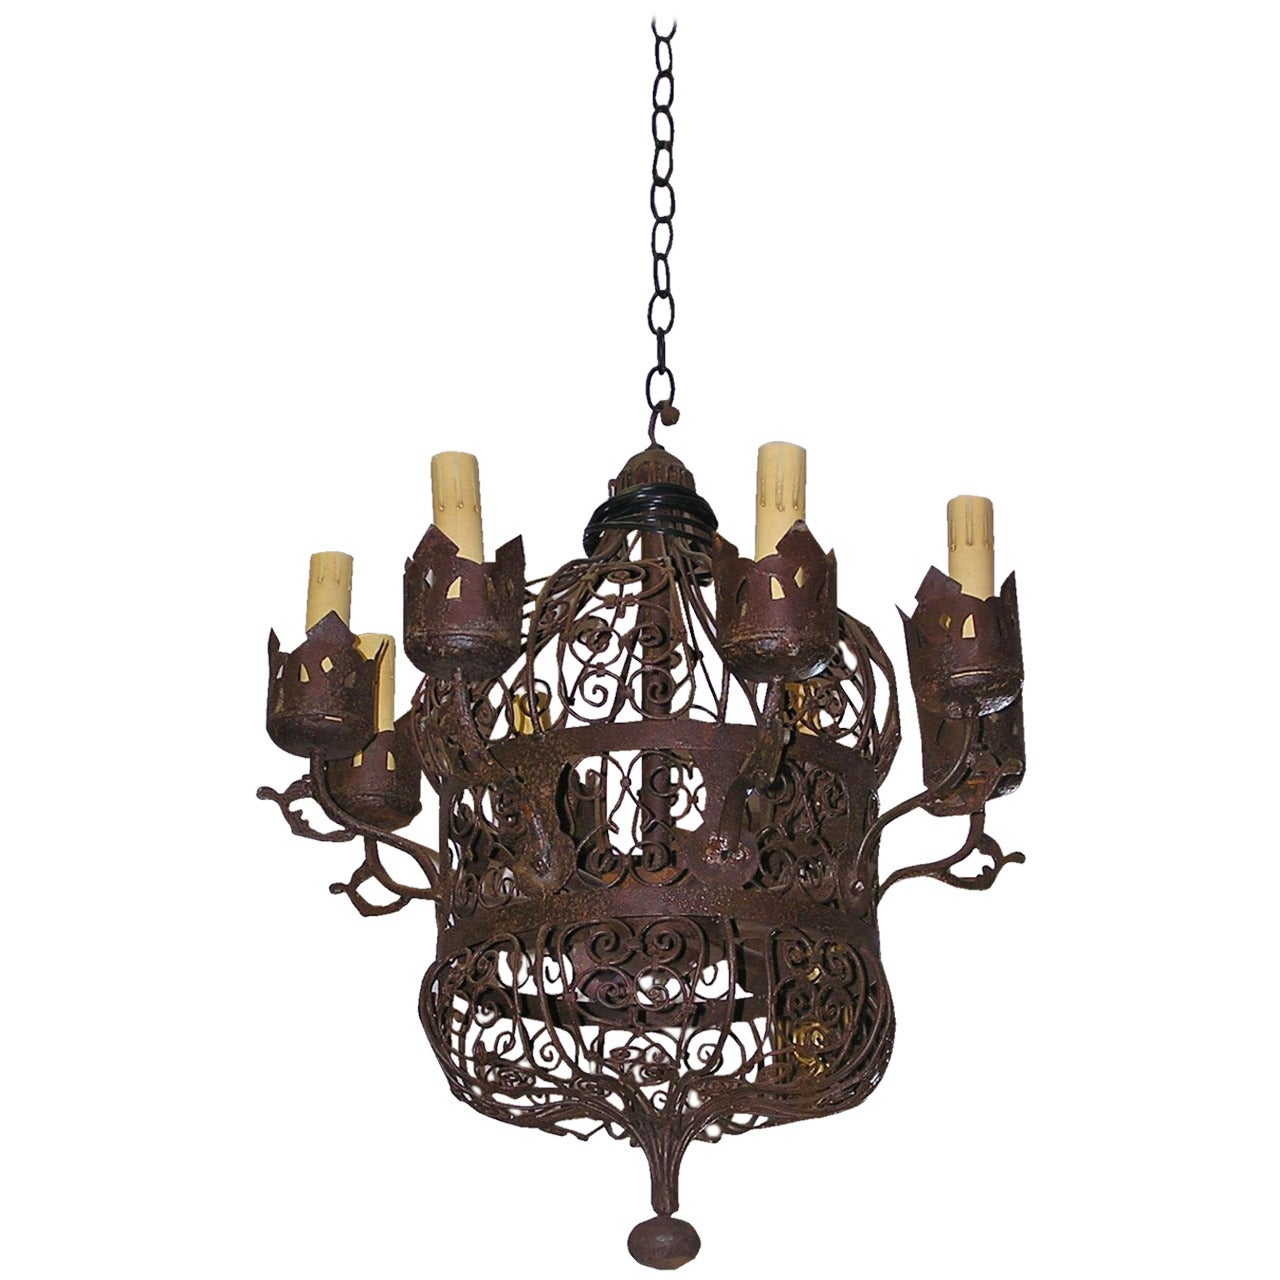 American Wrought Iron Scrolled Wire Work Chandelier.  Circa 1850